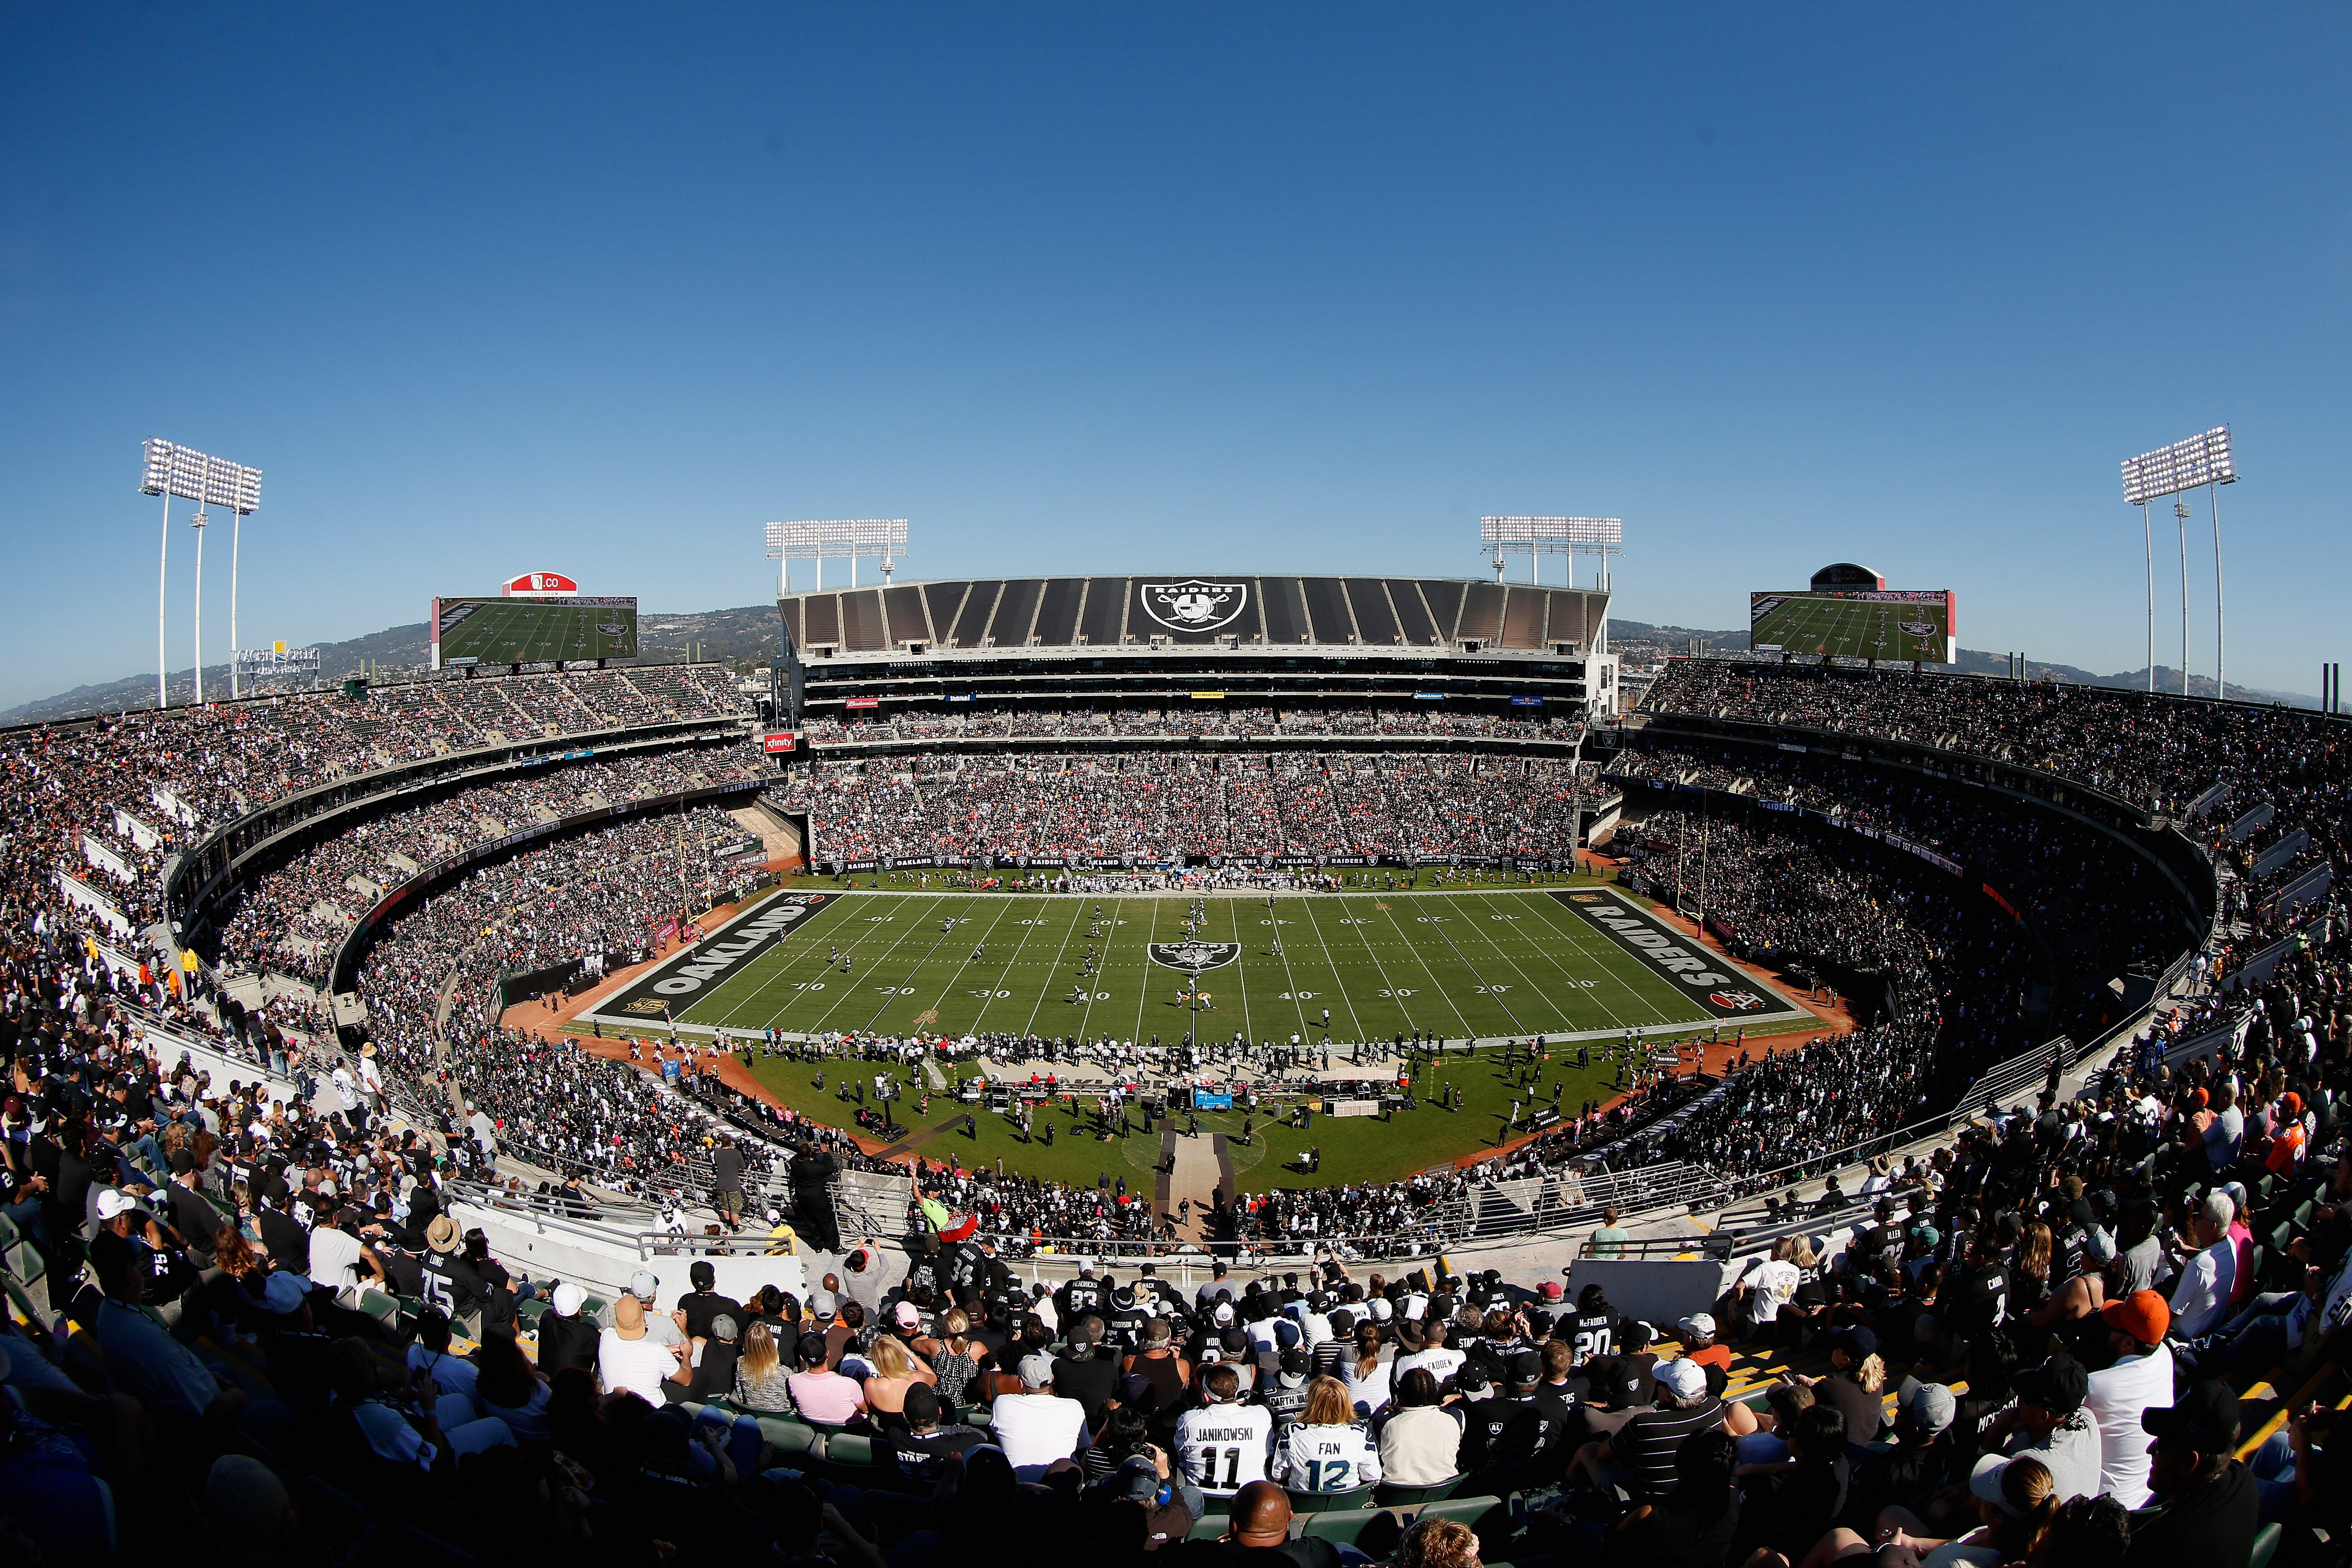 OAKLAND, CA - OCTOBER 11:  A general view during the Oakland Raiders game against the Denver Broncos at O.co Coliseum on October 11, 2015 in Oakland, California.  (Photo by Ezra Shaw/Getty Images)